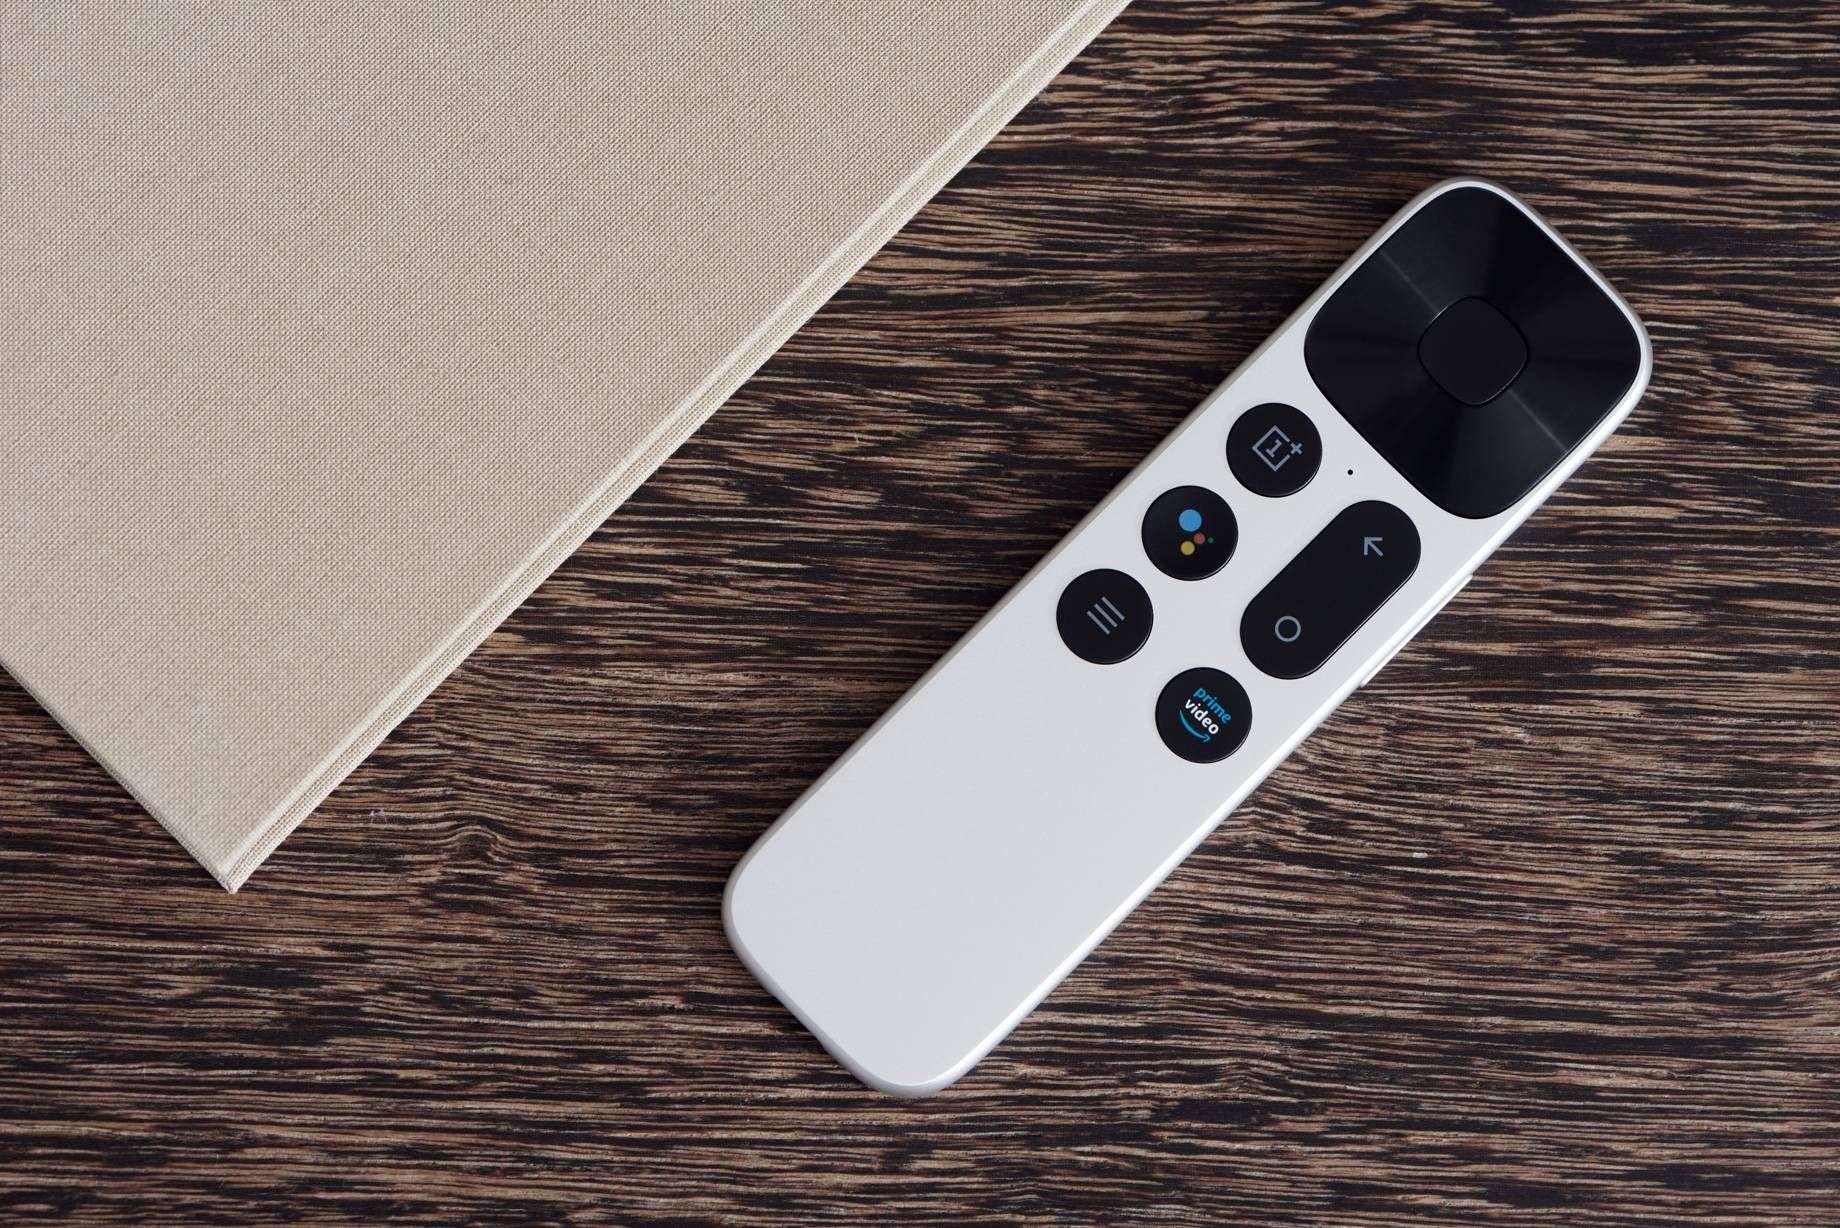 The OnePlus TV remote supports voice commands via Google Assistant